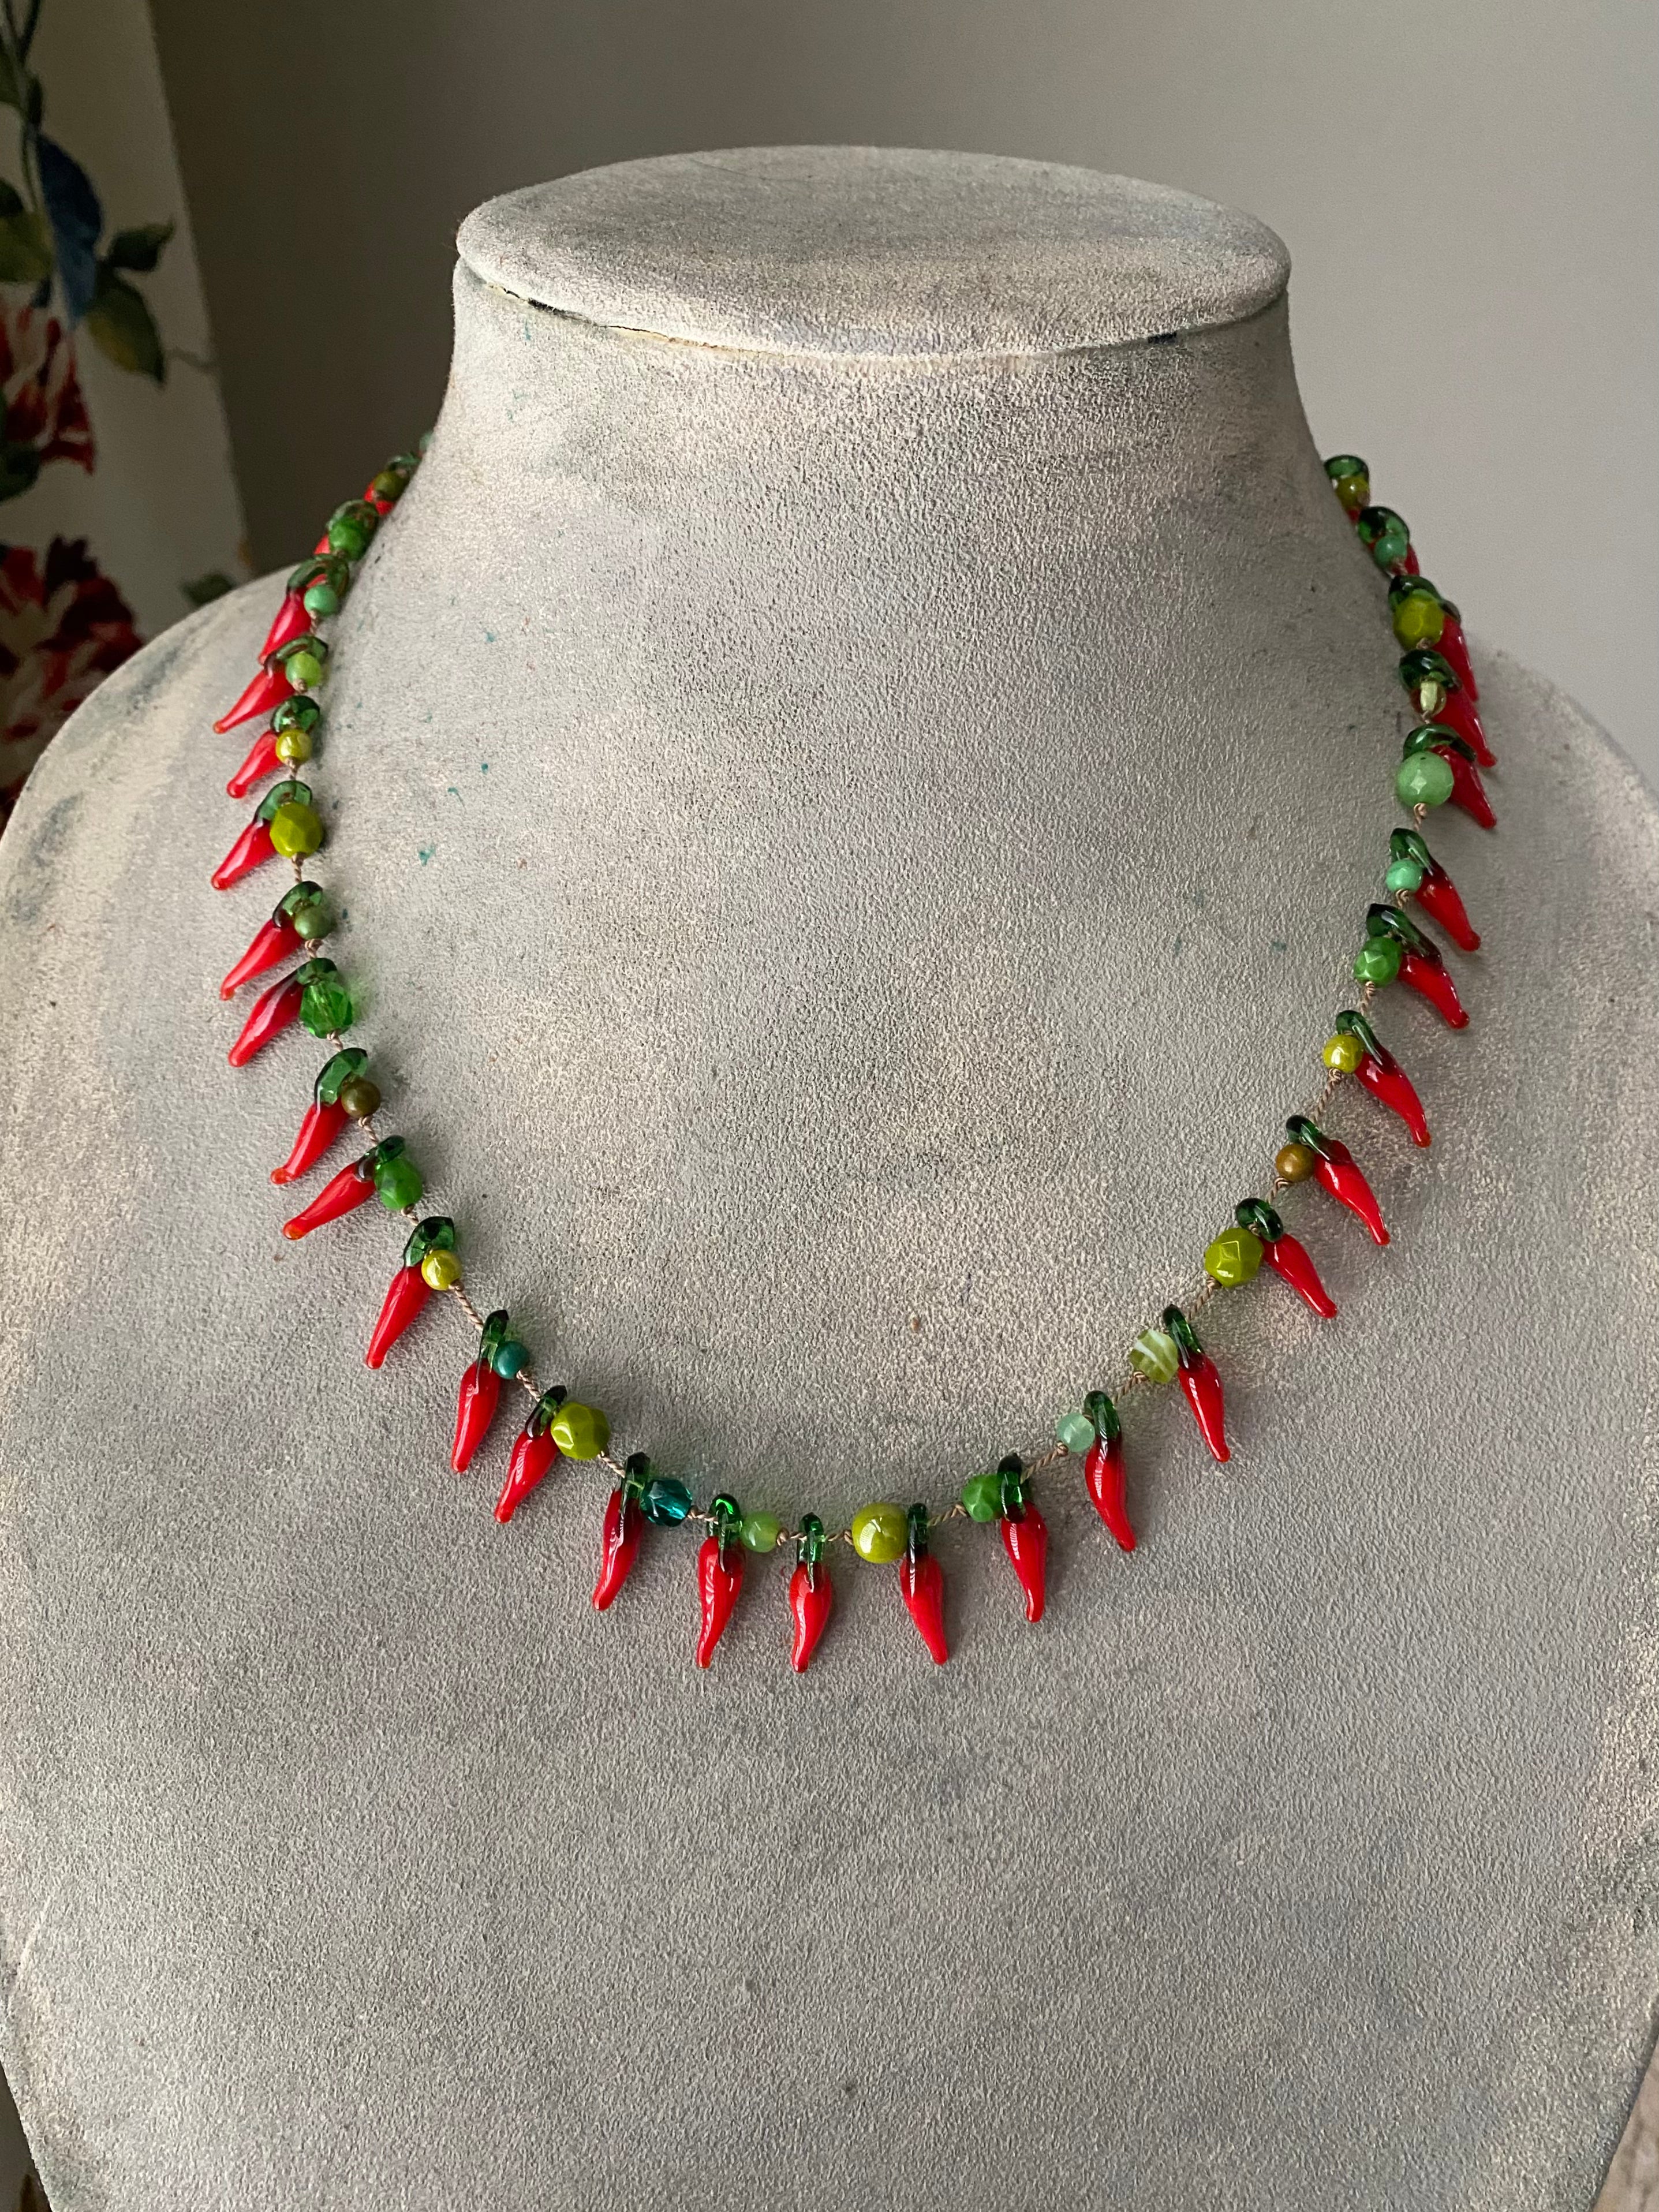 Knotted chili pepper necklace